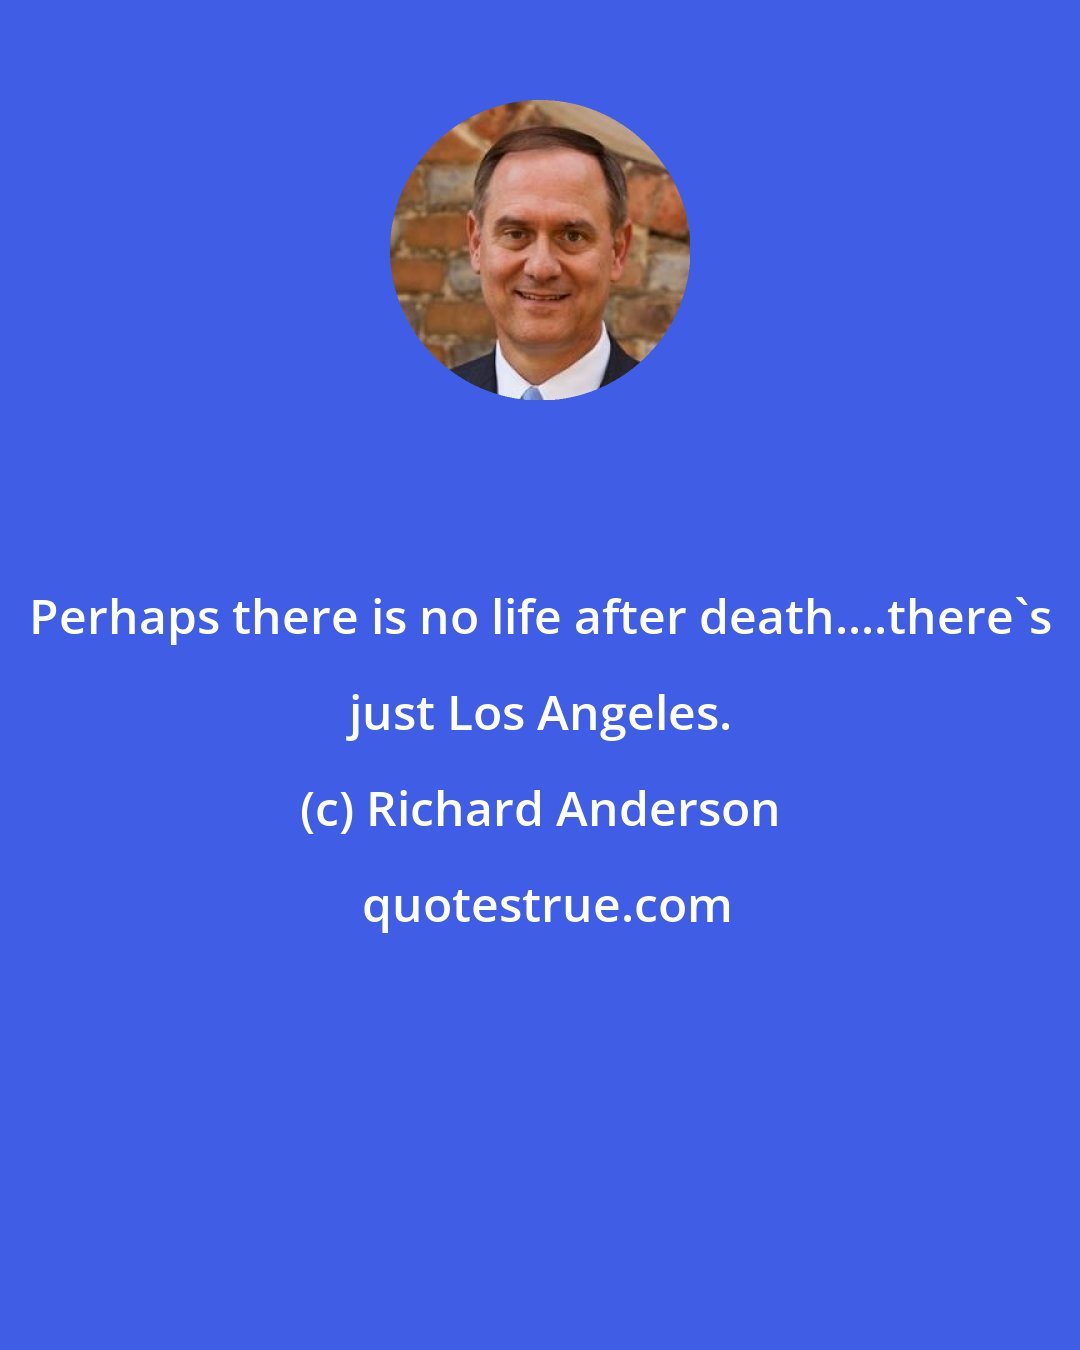 Richard Anderson: Perhaps there is no life after death....there's just Los Angeles.